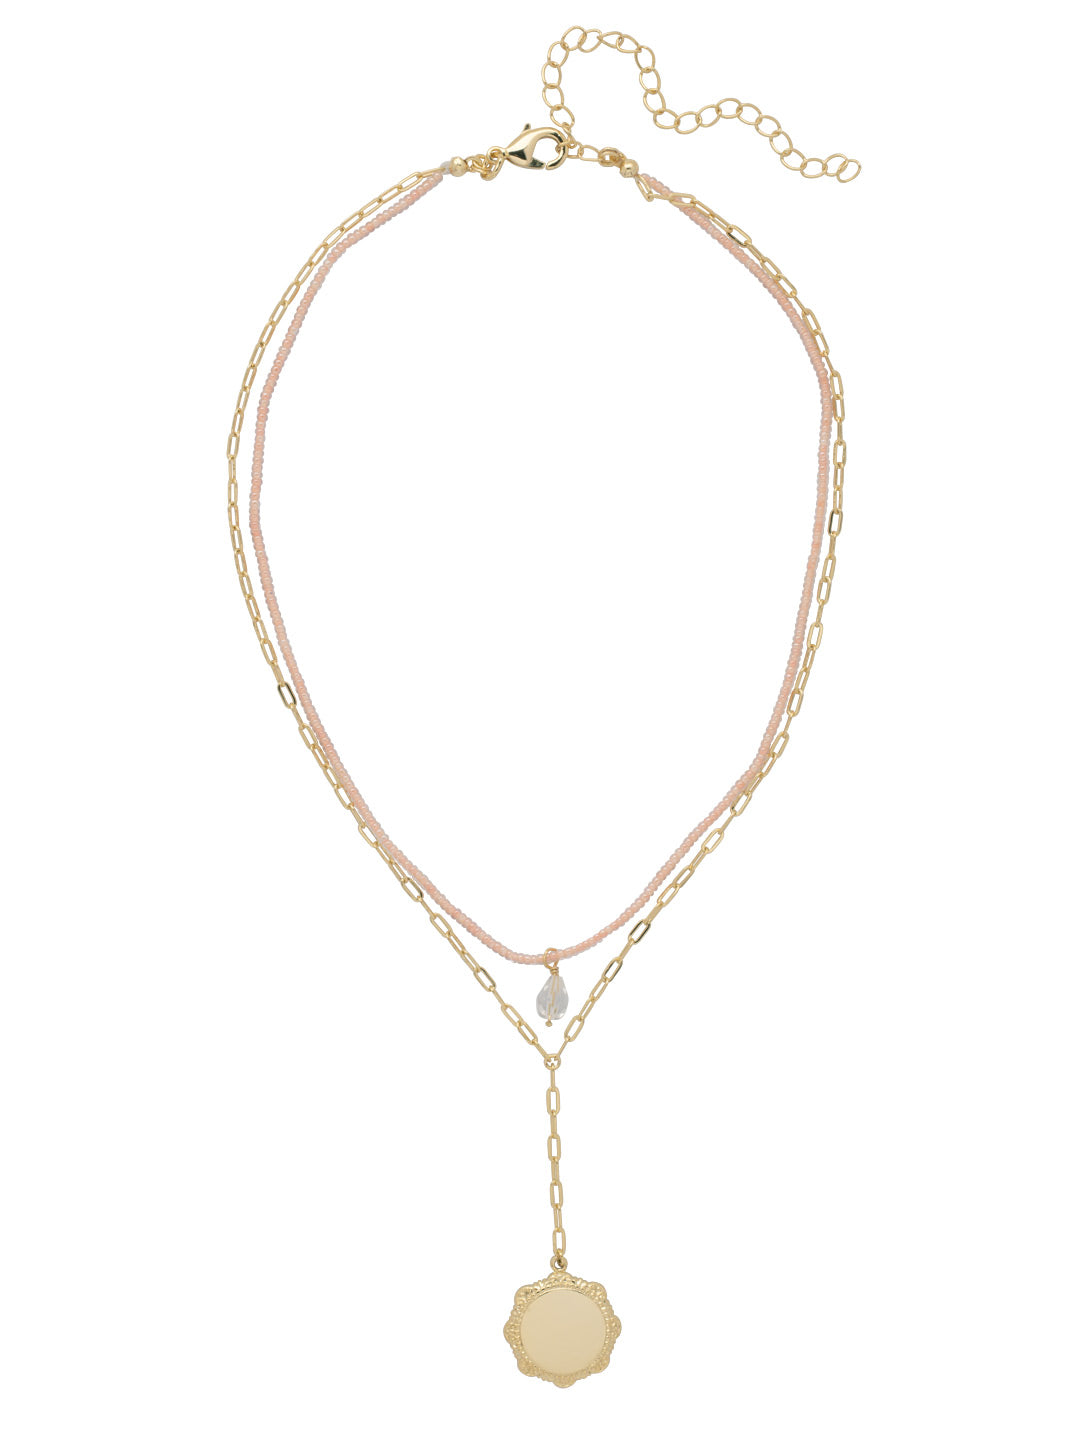 Cora Layered Necklace - NFJ3BGSCL - <p>The Cora Layered Necklace features a beaded strand with a clear beaded charm and a delicate lariat chain with a ruffle disk pendant. From Sorrelli's Silky Clouds collection in our Bright Gold-tone finish.</p>